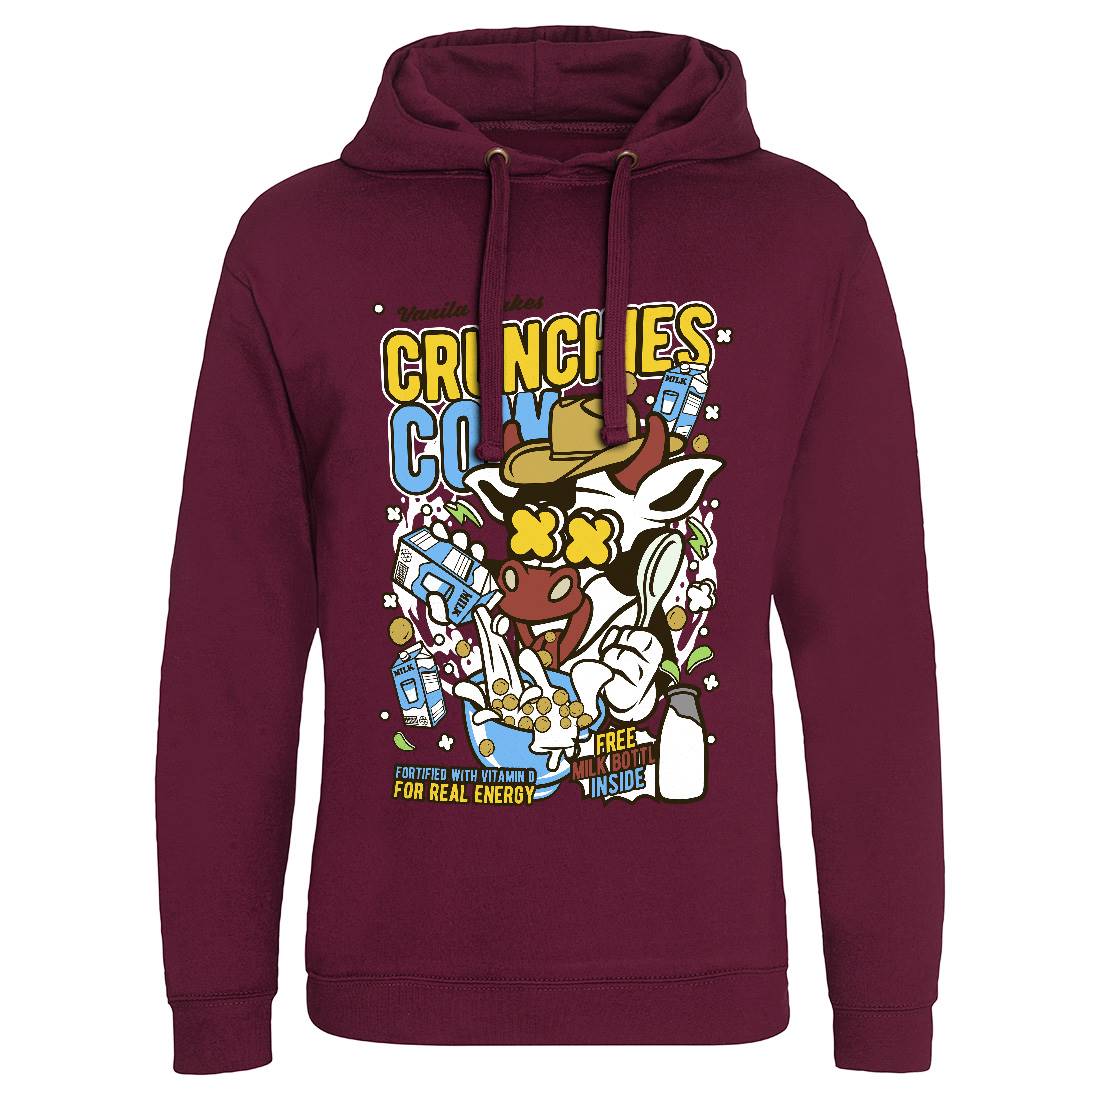 Crunchies Cow Mens Hoodie Without Pocket Food C533